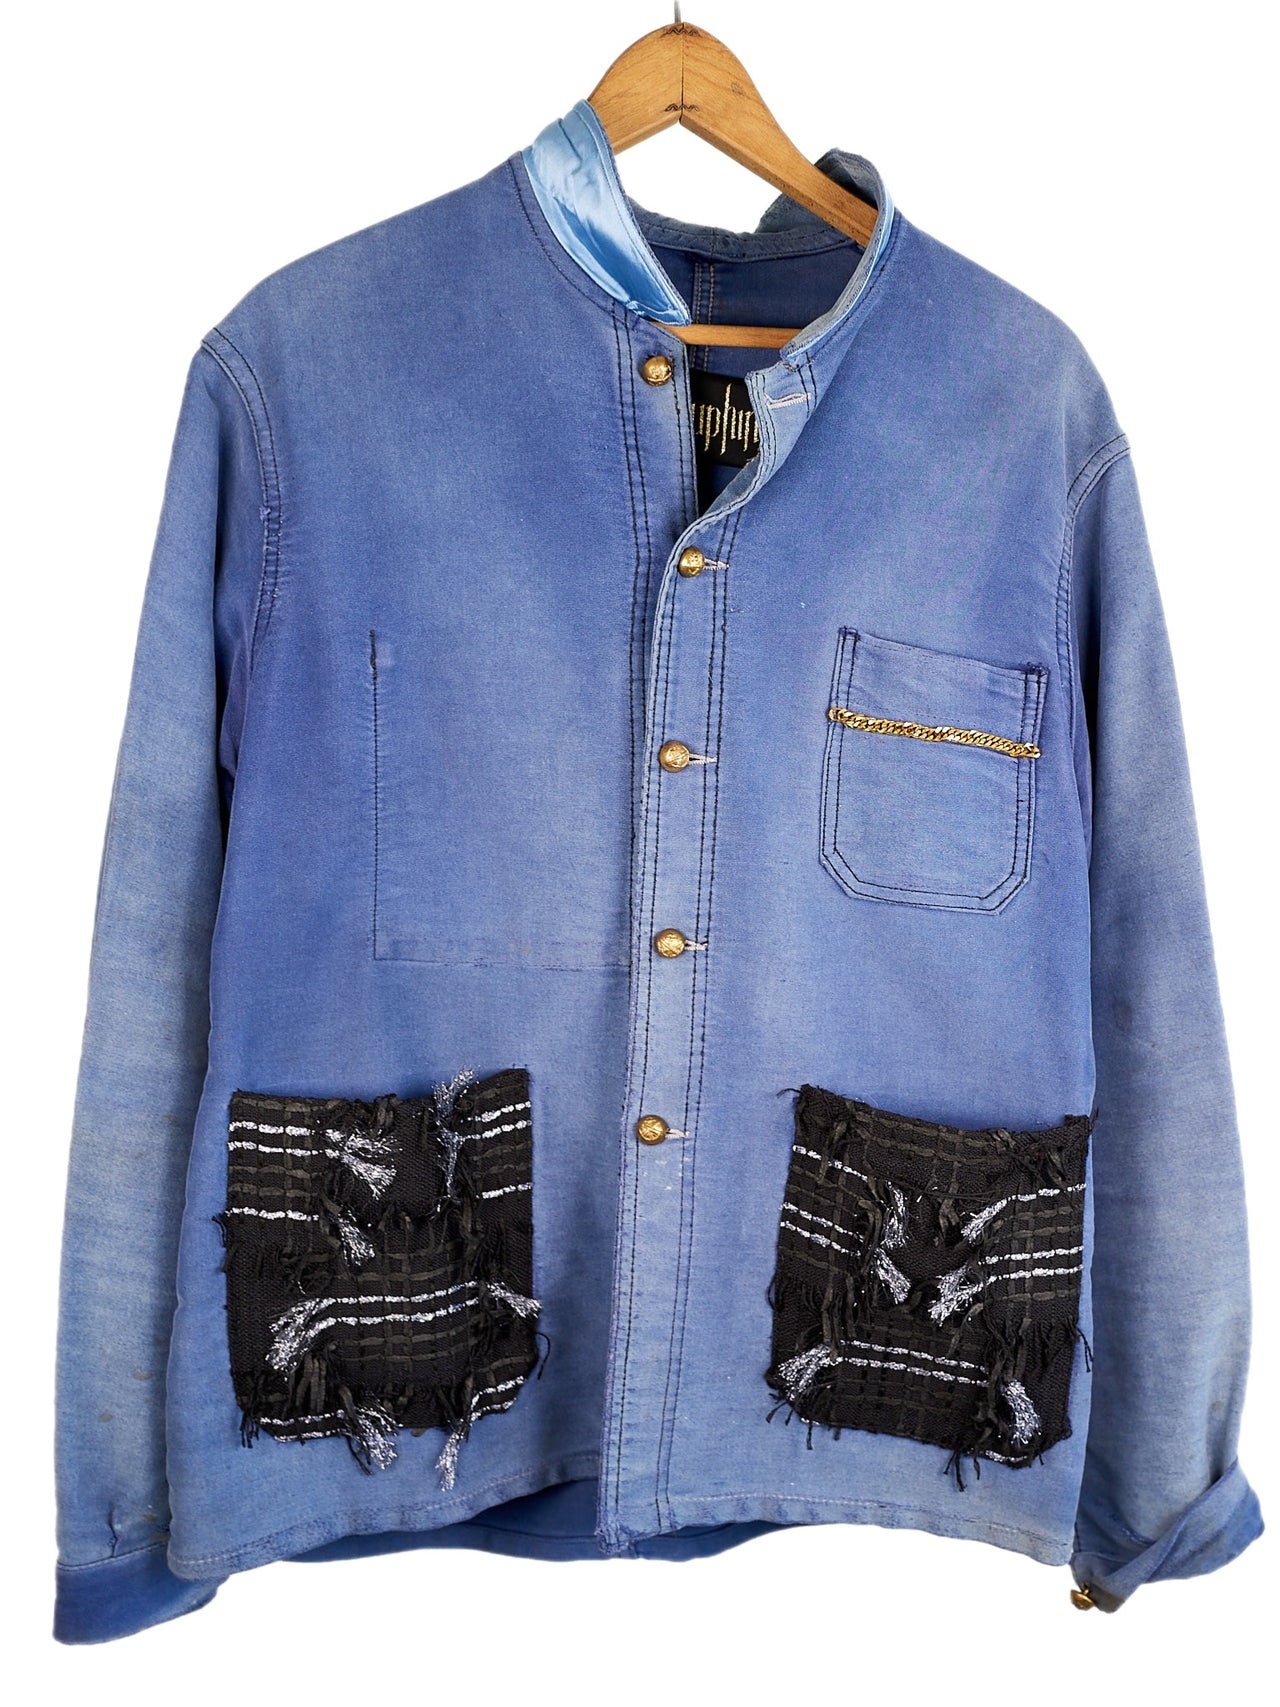 Jacket Distressed Bleached Blue Black Silver Pockets Small